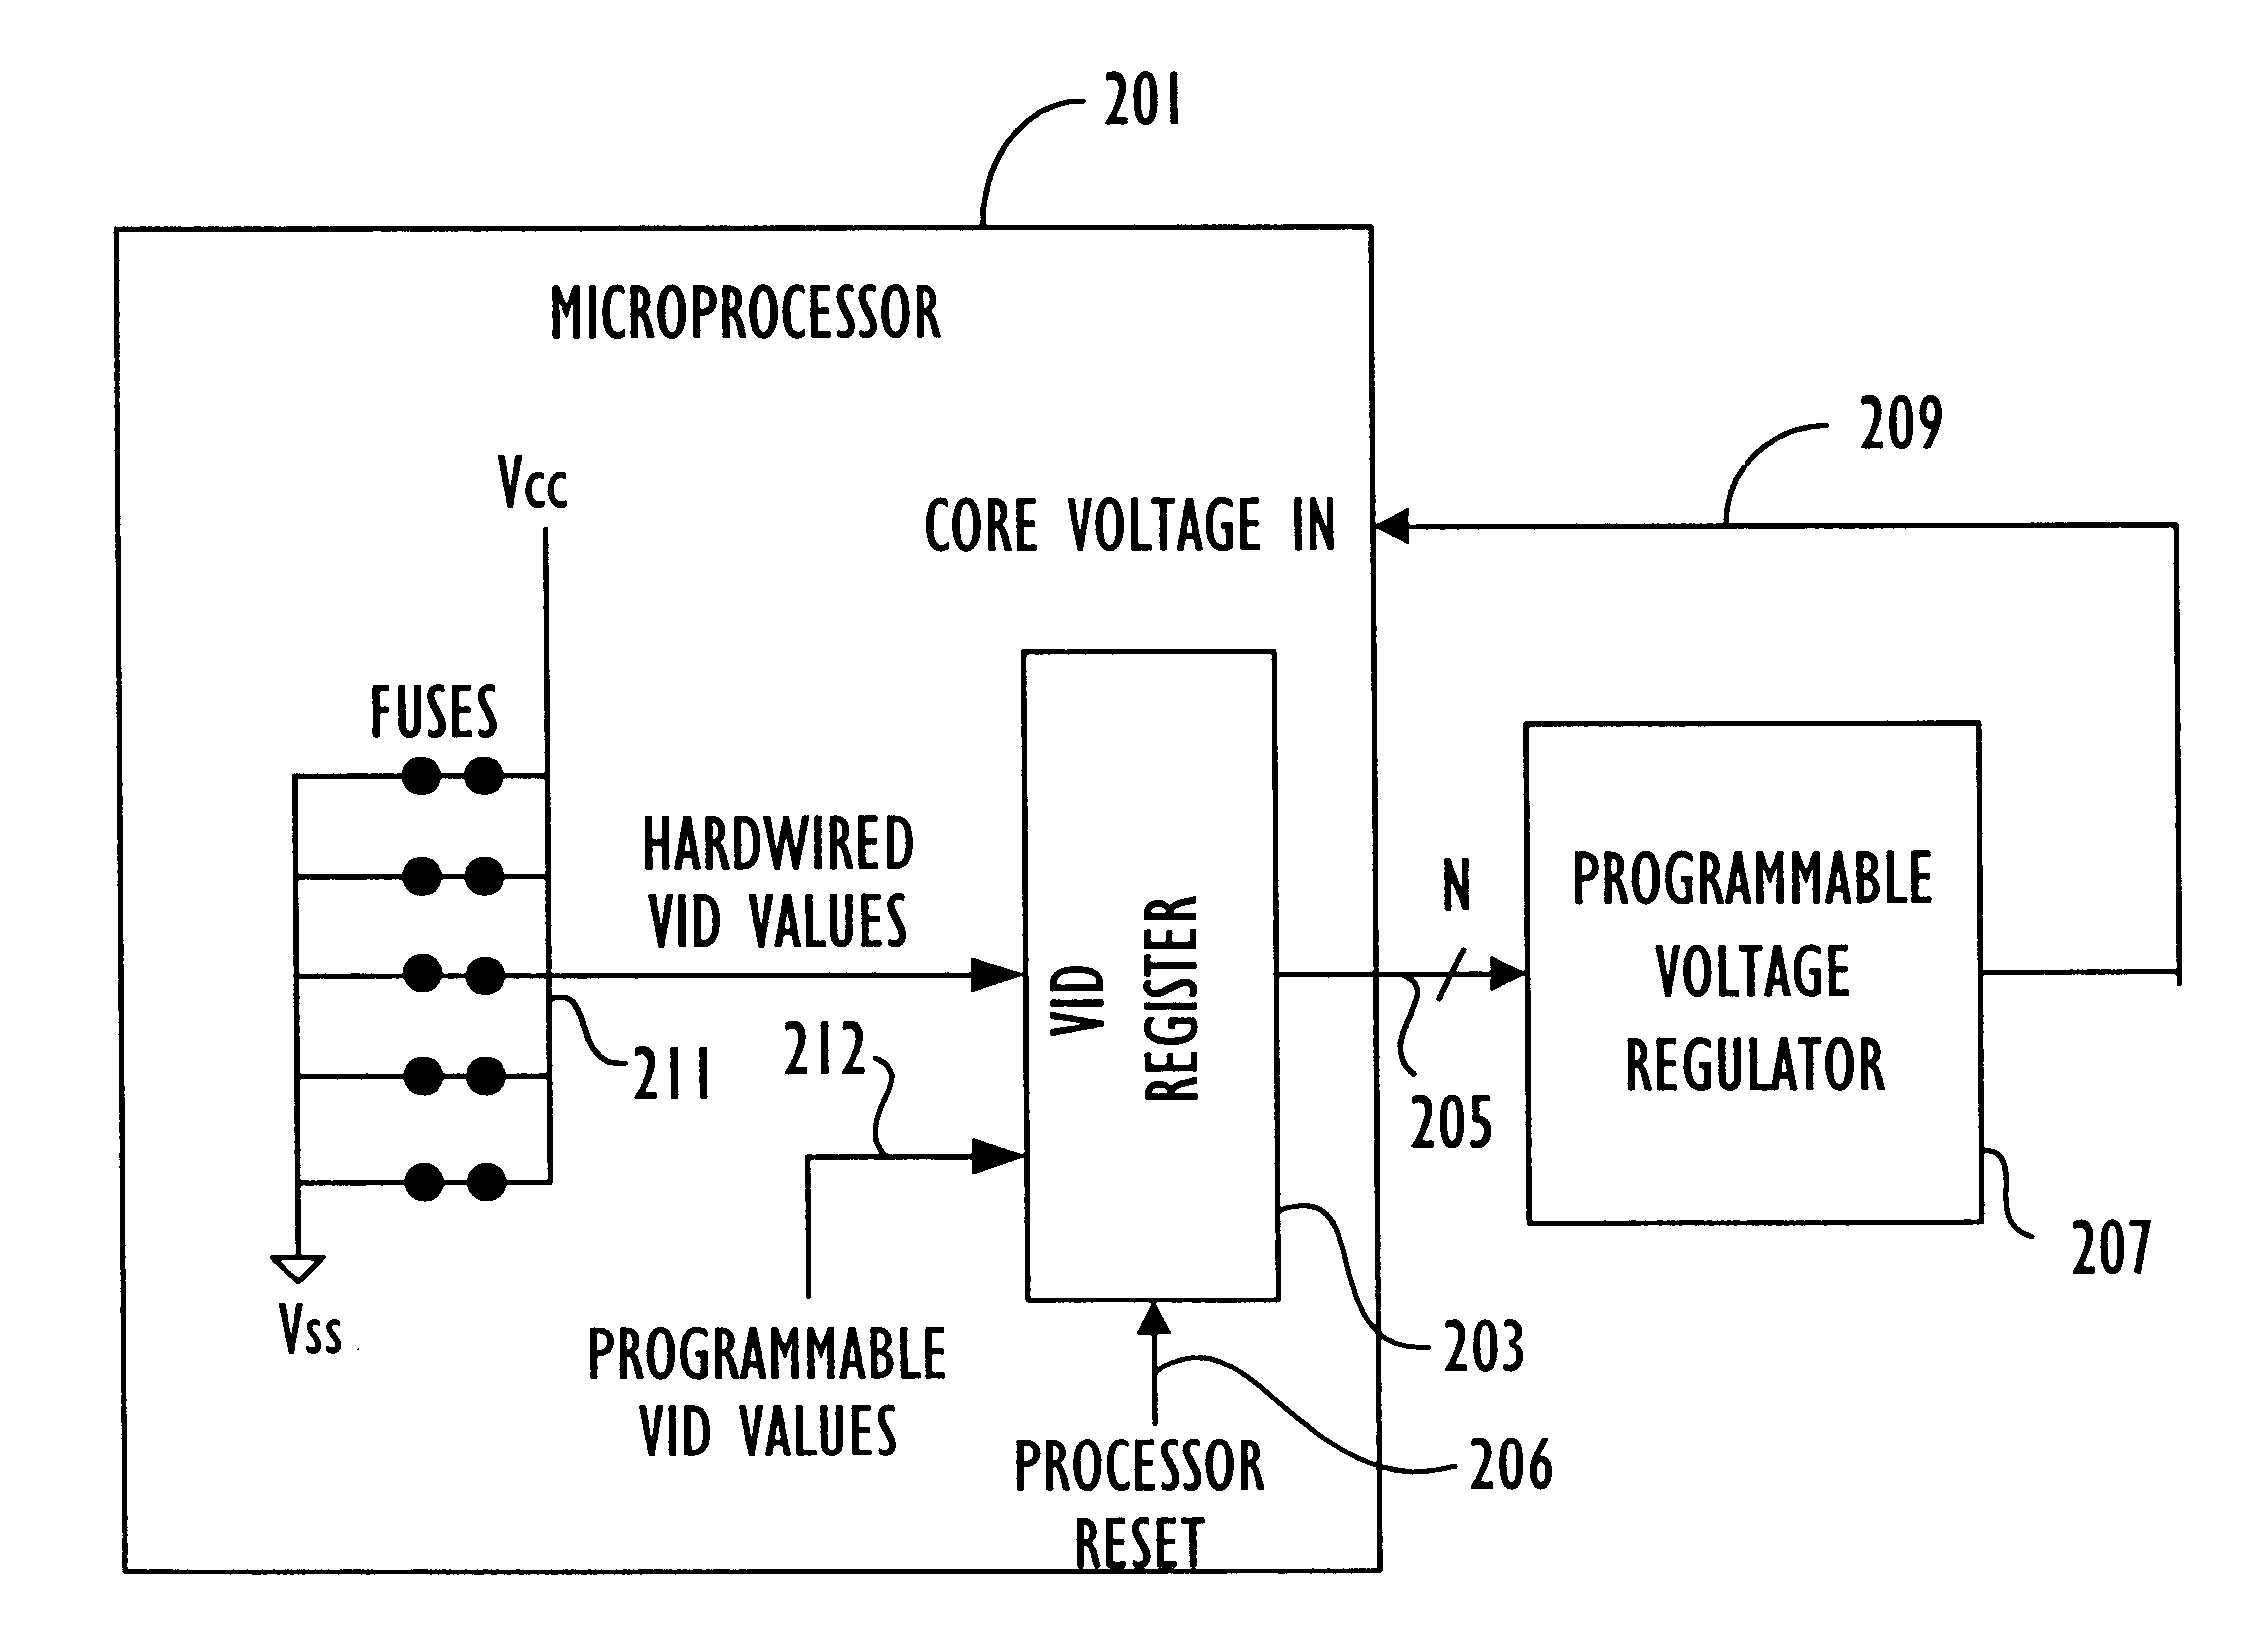 System for specifying core voltage for a microprocessor by selectively outputting one of a first, fixed and a second, variable voltage control settings from the microprocessor